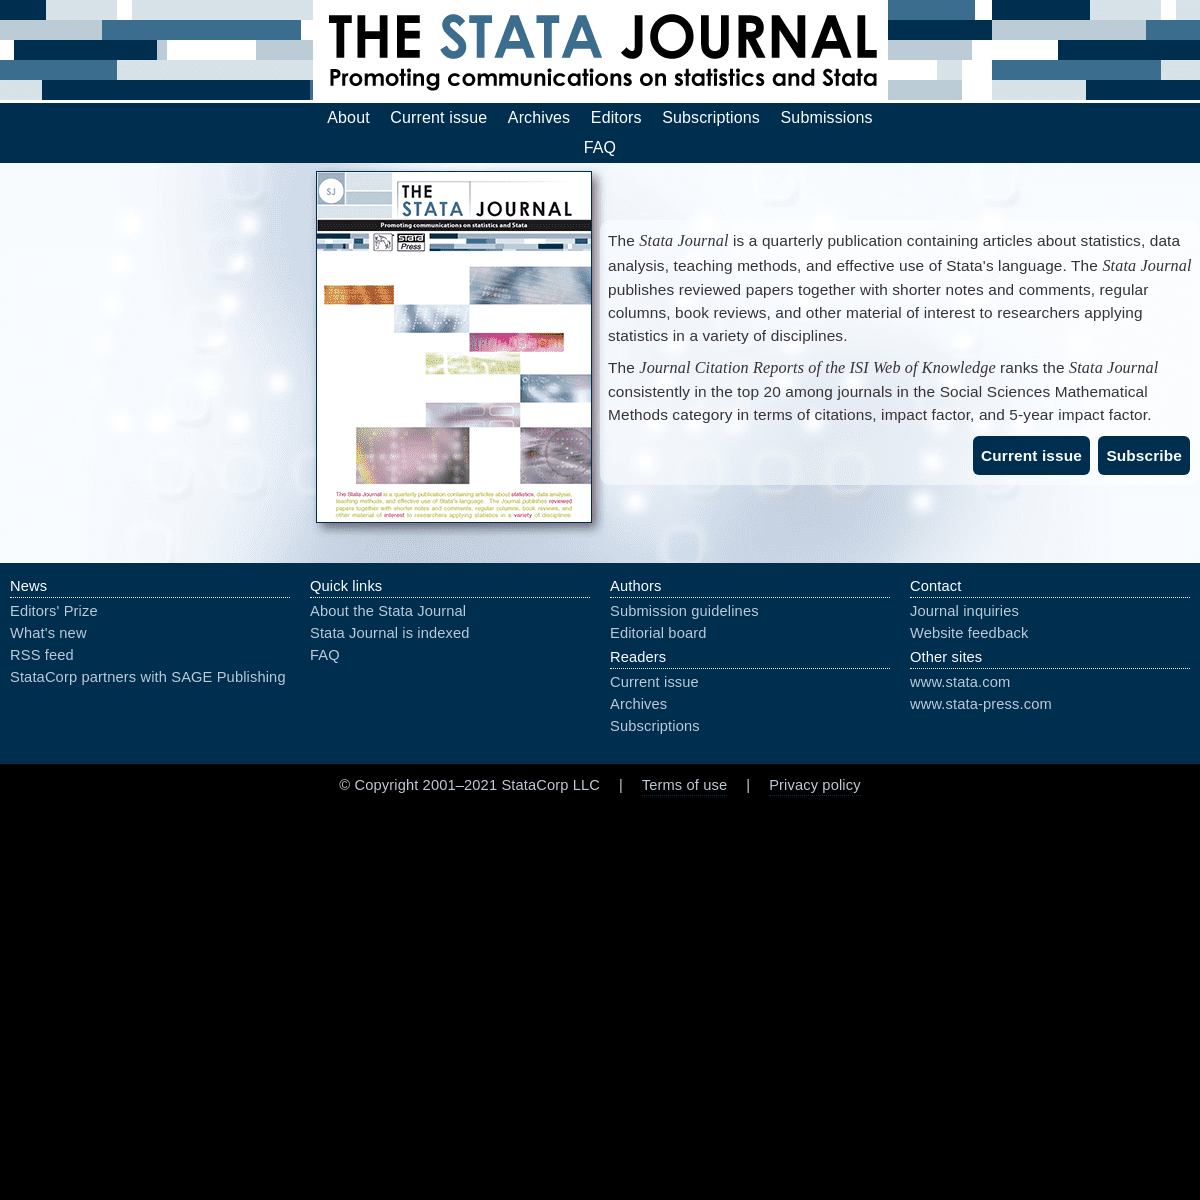 A complete backup of https://stata-journal.com